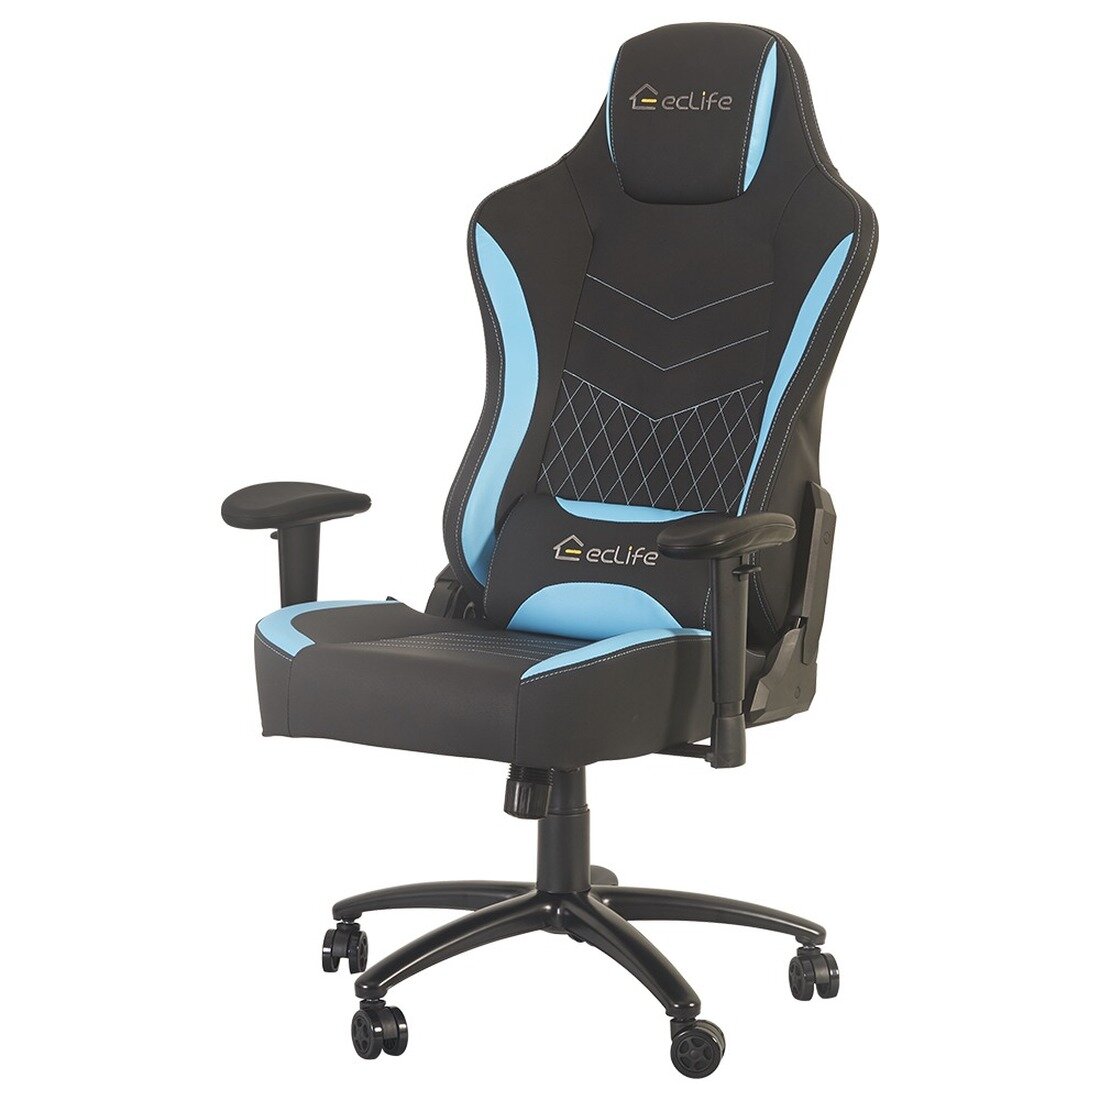 Details about   Ergonomic Leather Chair Racing Gaming Swivel Office Computer Desk Seat Recliner 